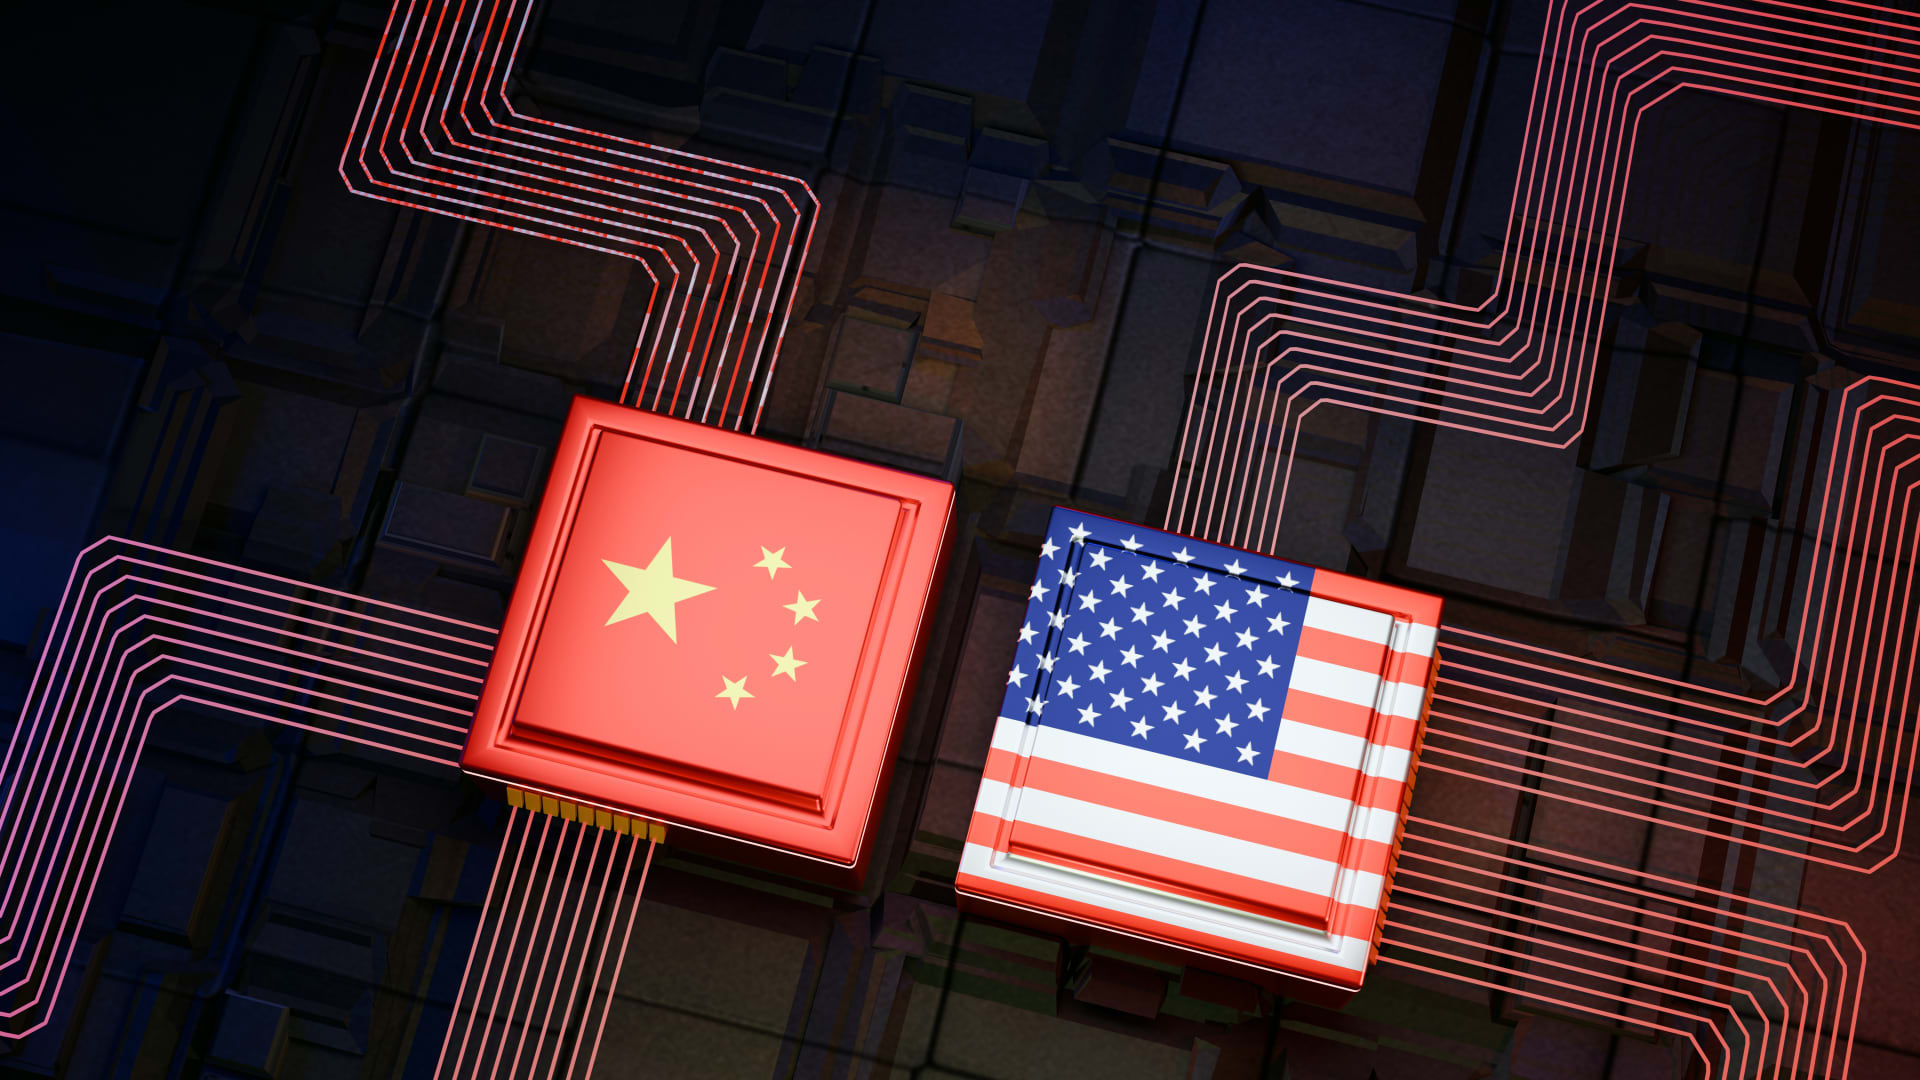 China remains crucial for U.S. chipmakers amid rising tensions between the world's top two economies